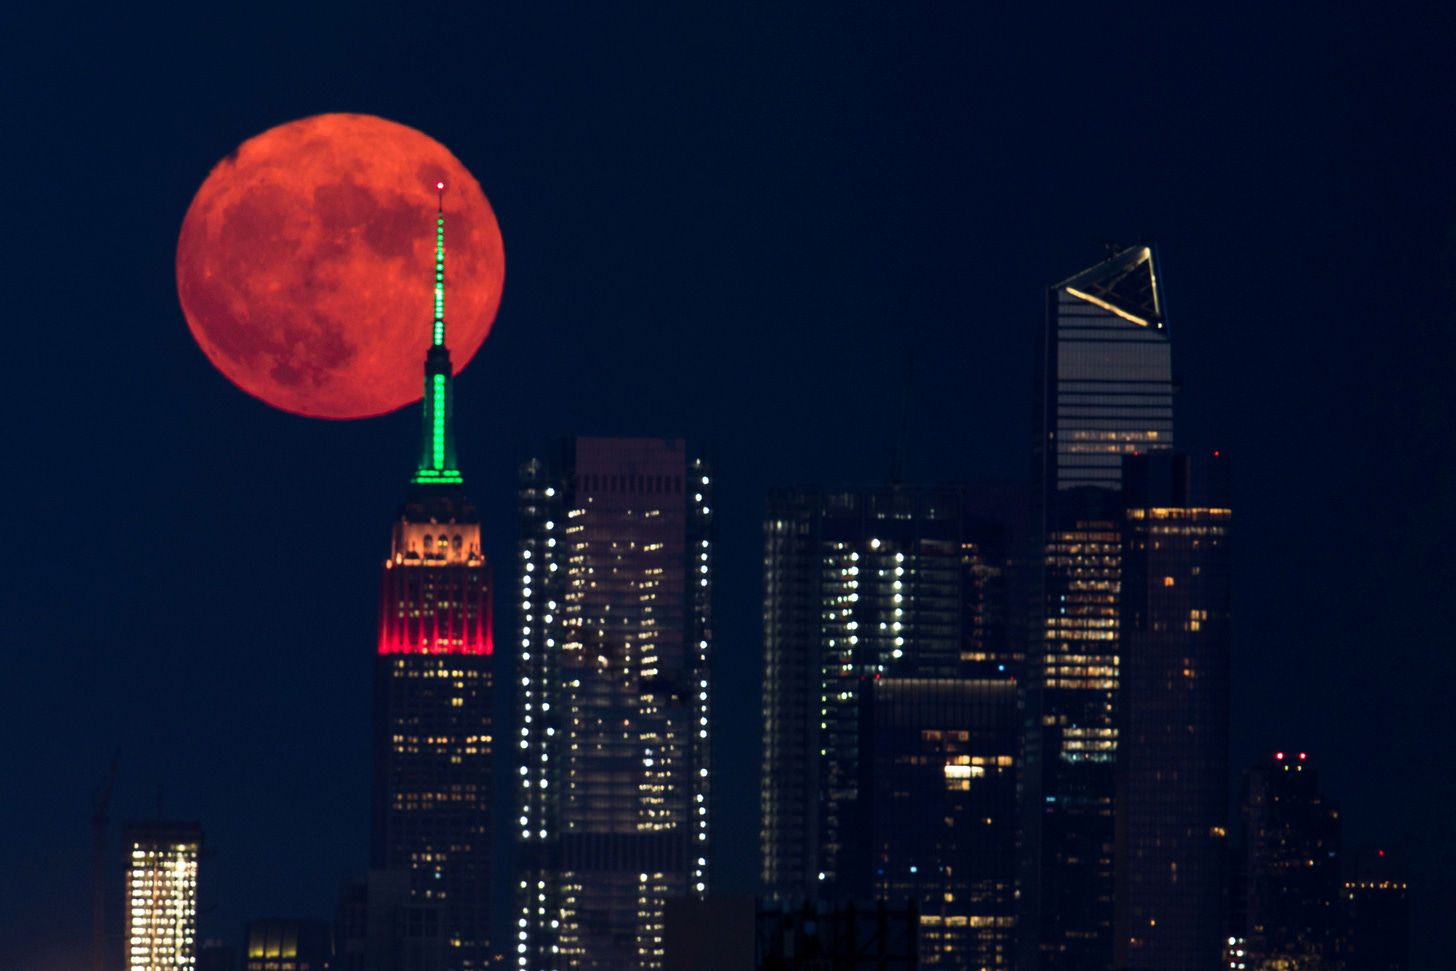 The full moon rises behind the Empire State Building in New York City, New York, U.S., July 23, 2021. REUTERS/Bjoern Kils/New York Media Boat 